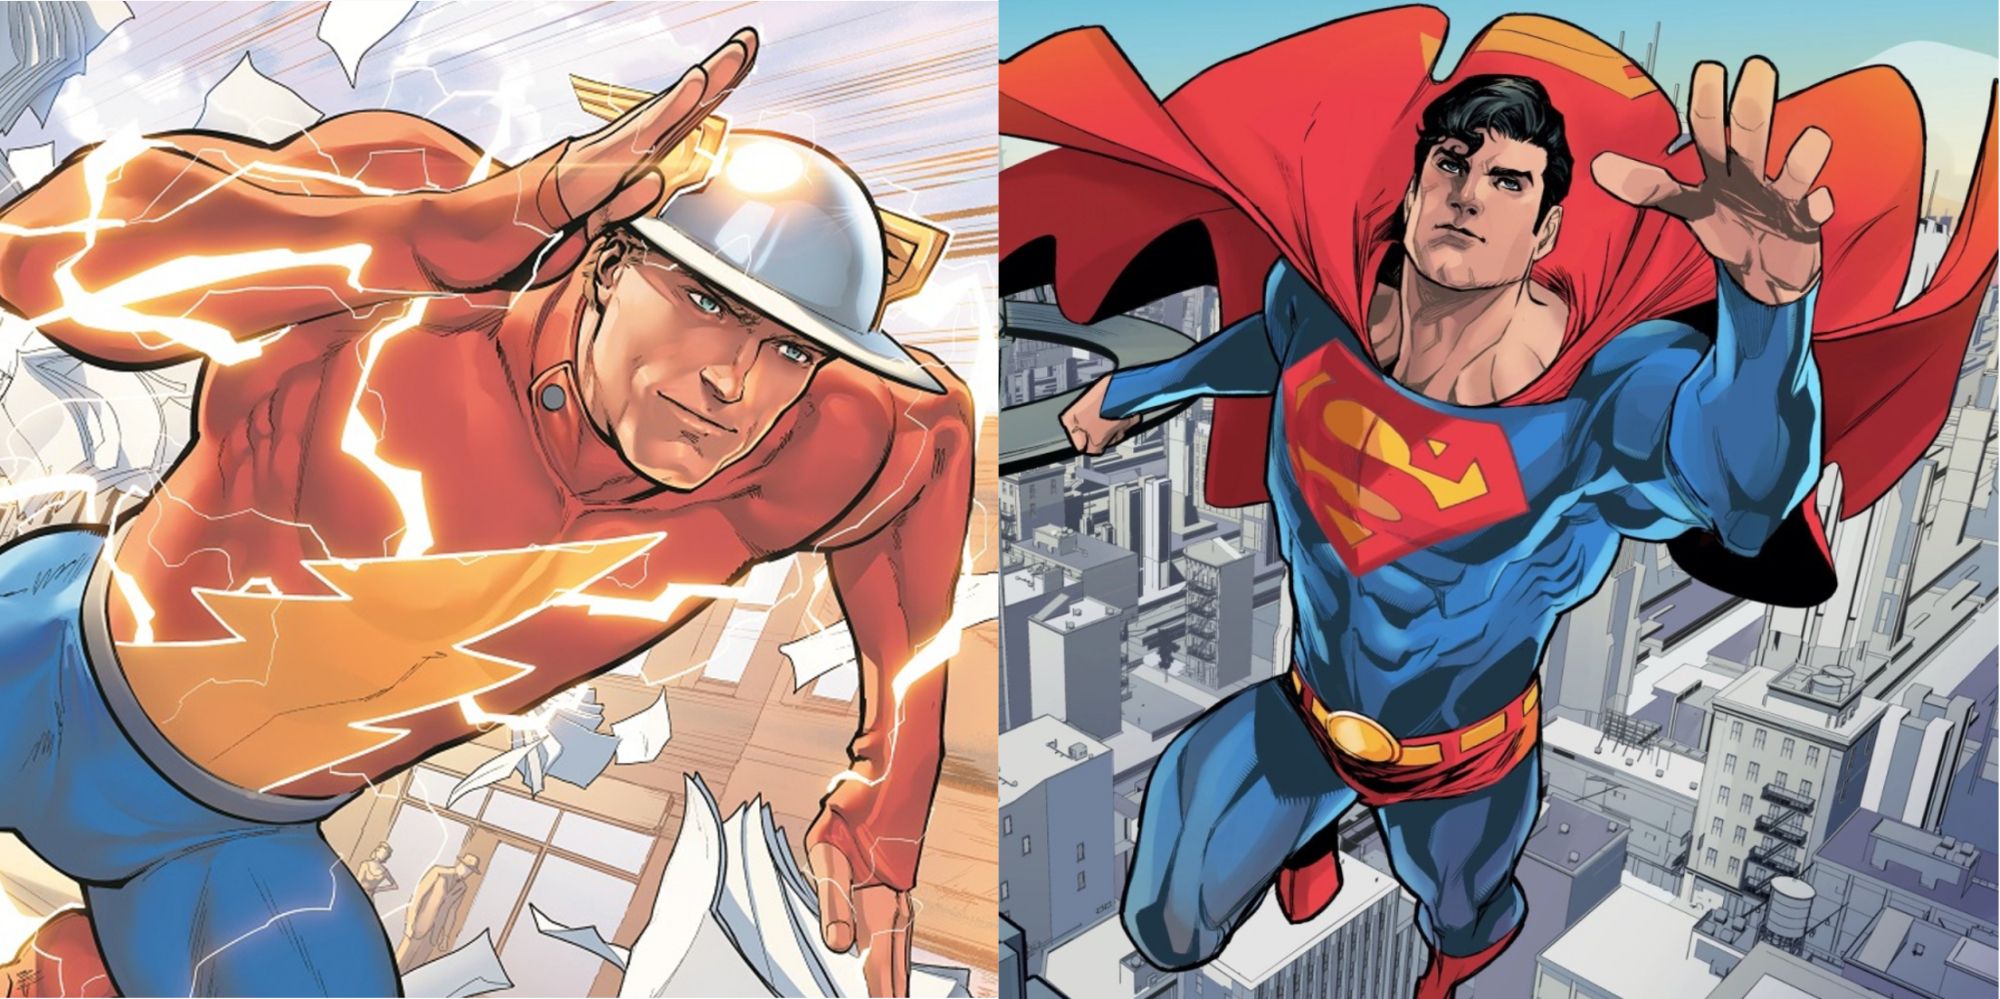 Split image of Jay Garrick and Superman in their cities in DC comics